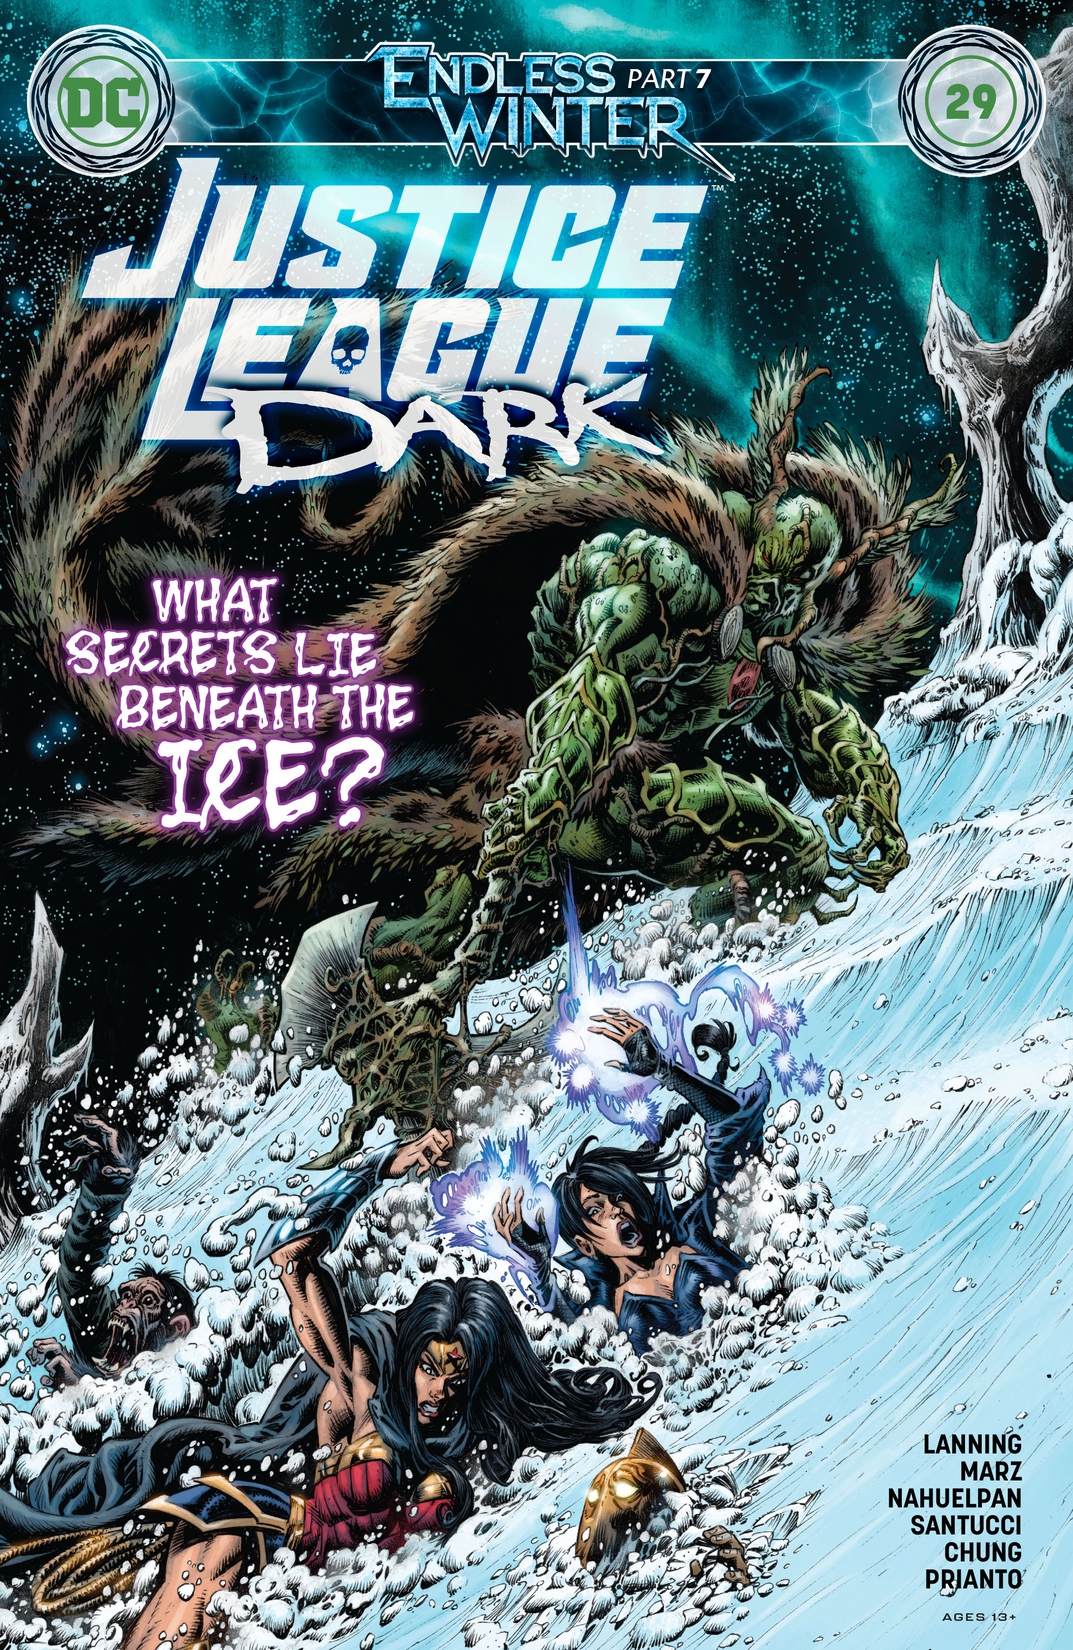 Justice League Dark (2018-) #29 preview images